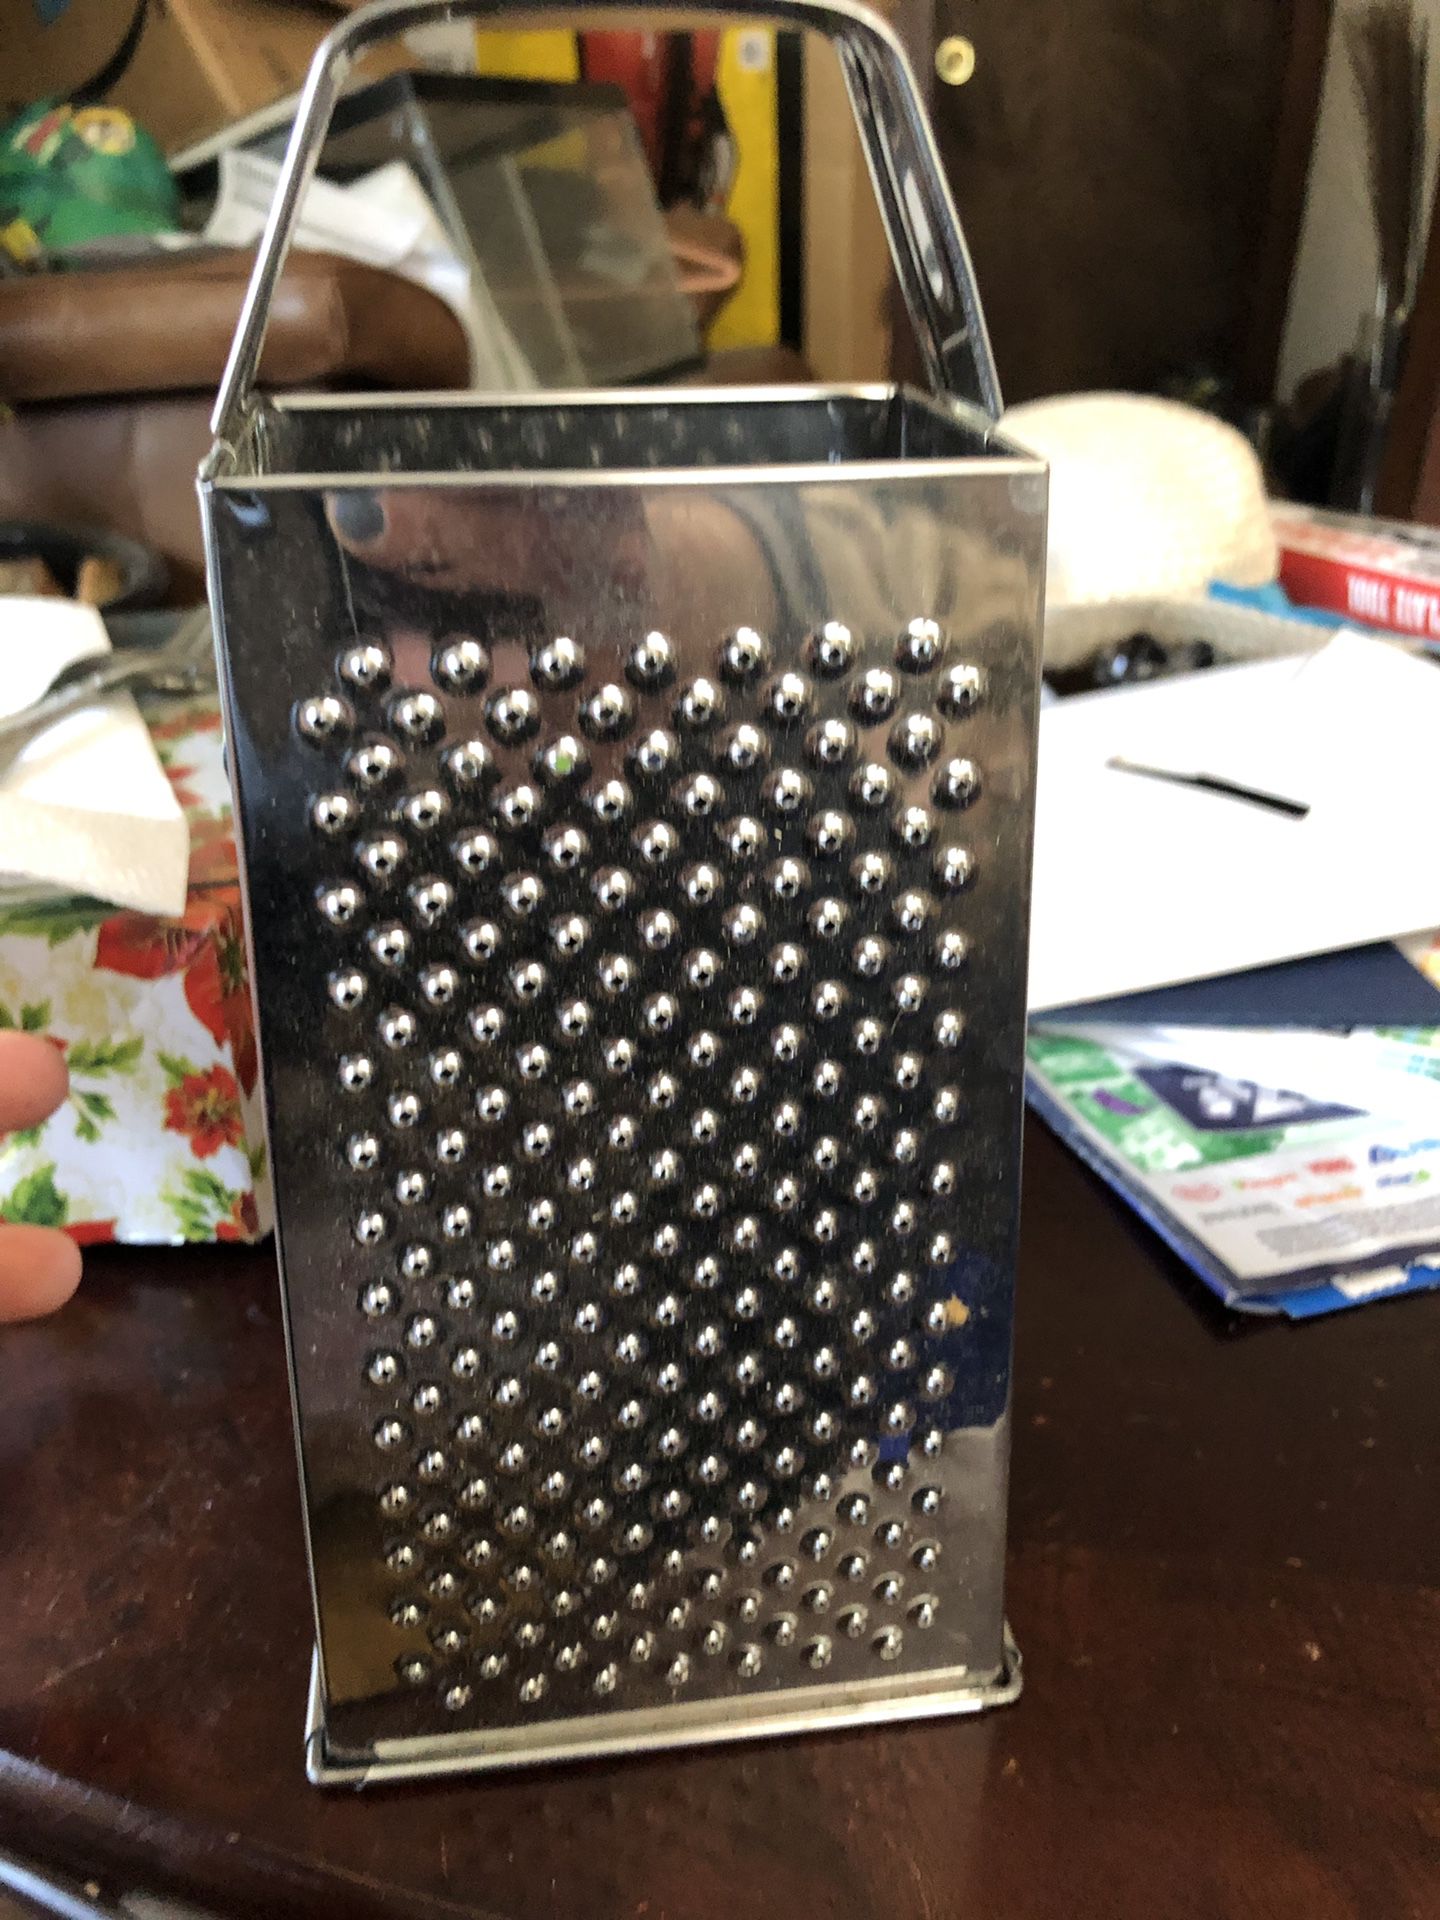 9” cheese grater never used.